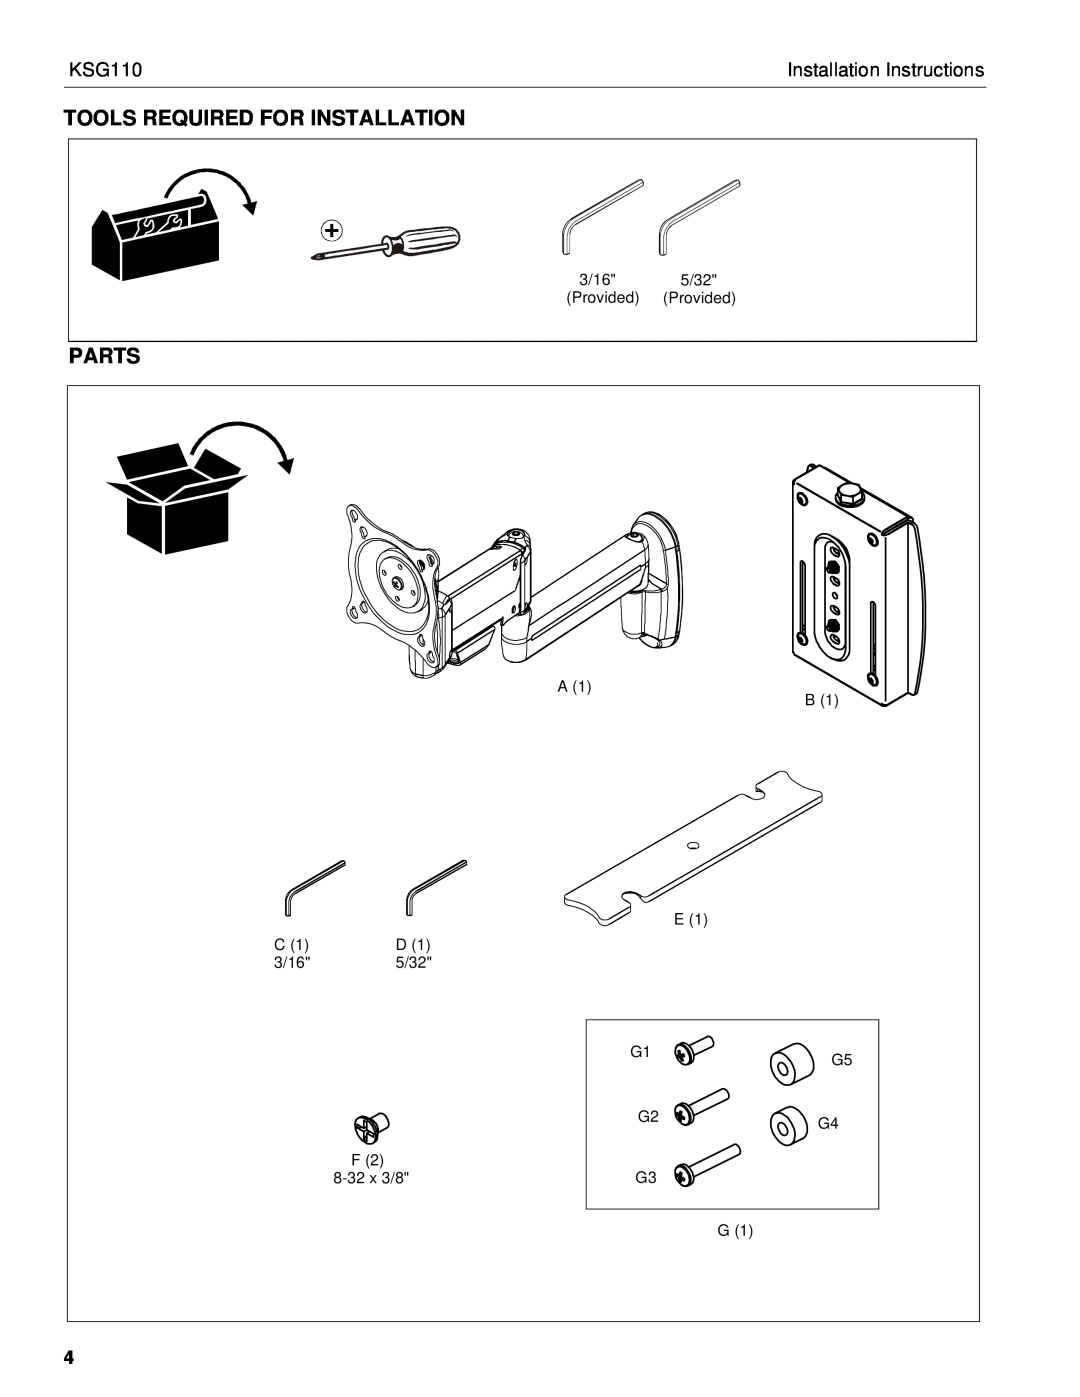 Chief Manufacturing KSG110 installation instructions Tools Required For Installation, Parts, Installation Instructions 